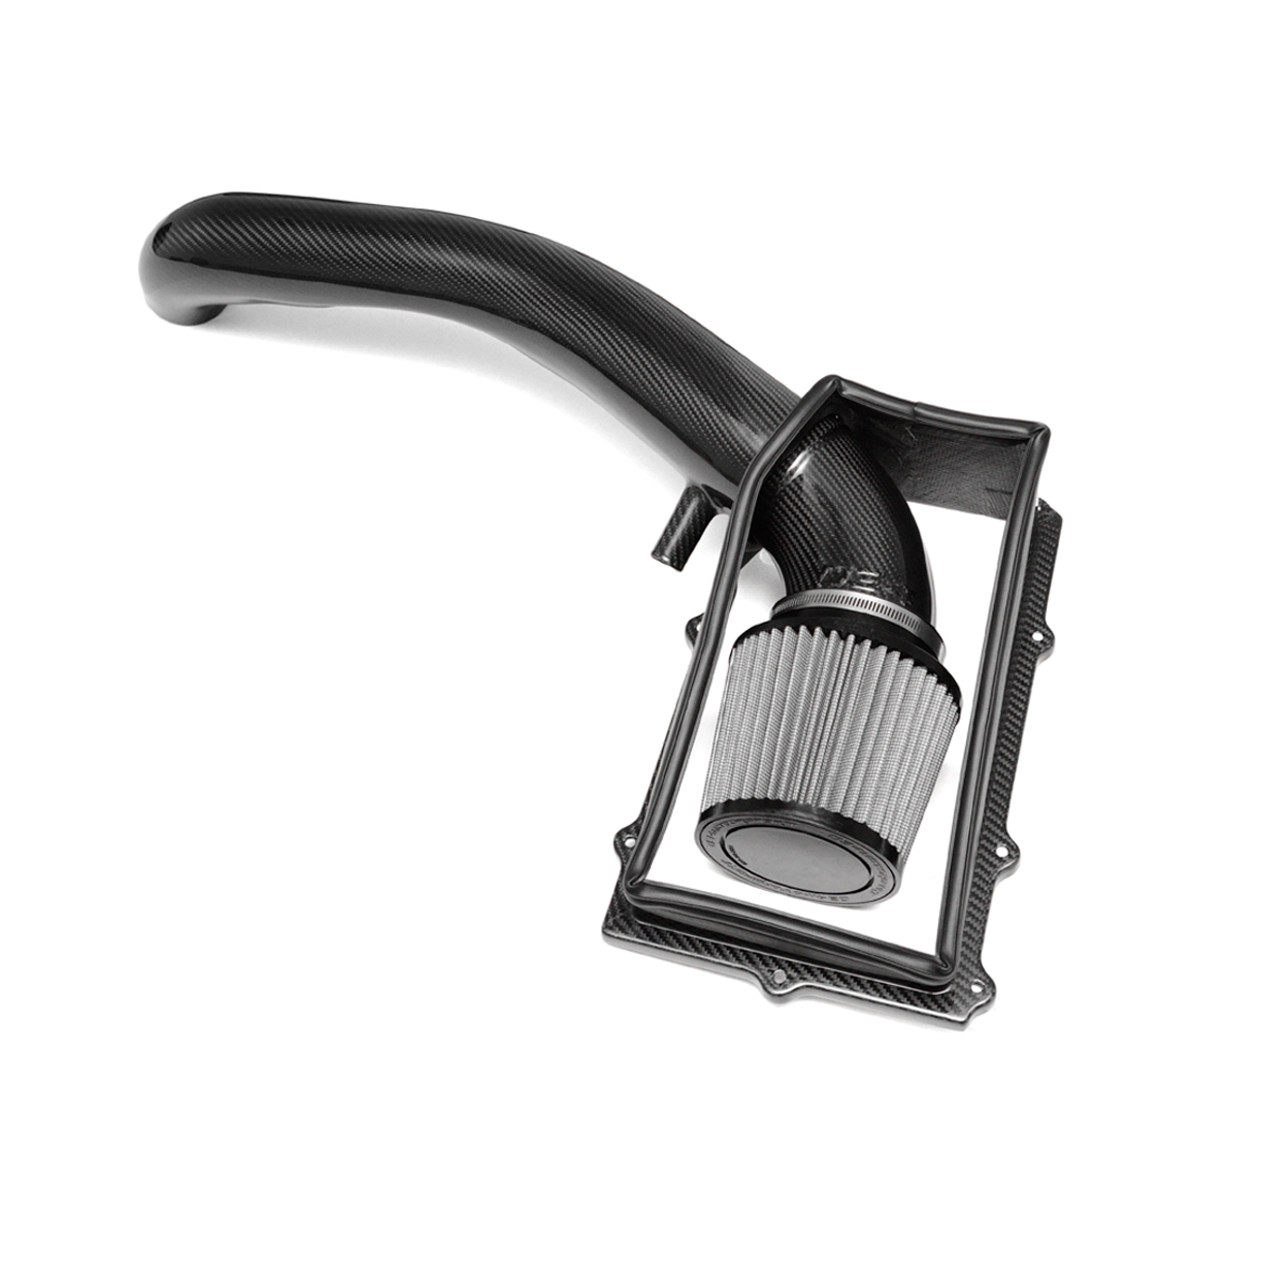 8V Audi RS3 2.5 TFSI X34 Carbon Fiber Cold Air Intake System for ROW (Non-USA) Vehicles